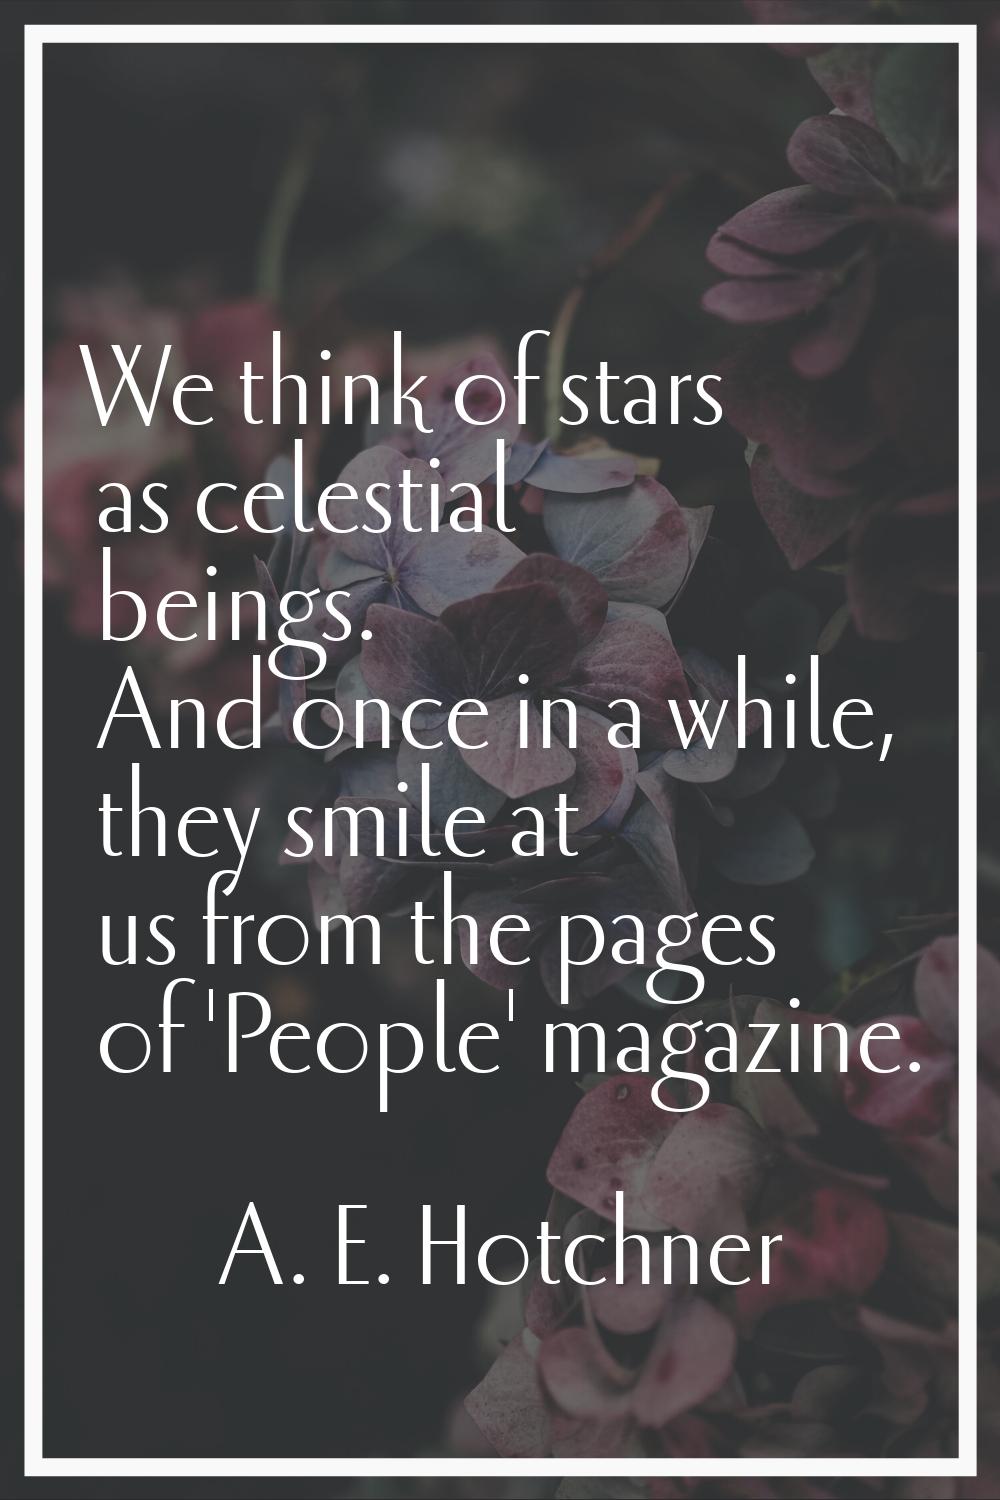 We think of stars as celestial beings. And once in a while, they smile at us from the pages of 'Peo